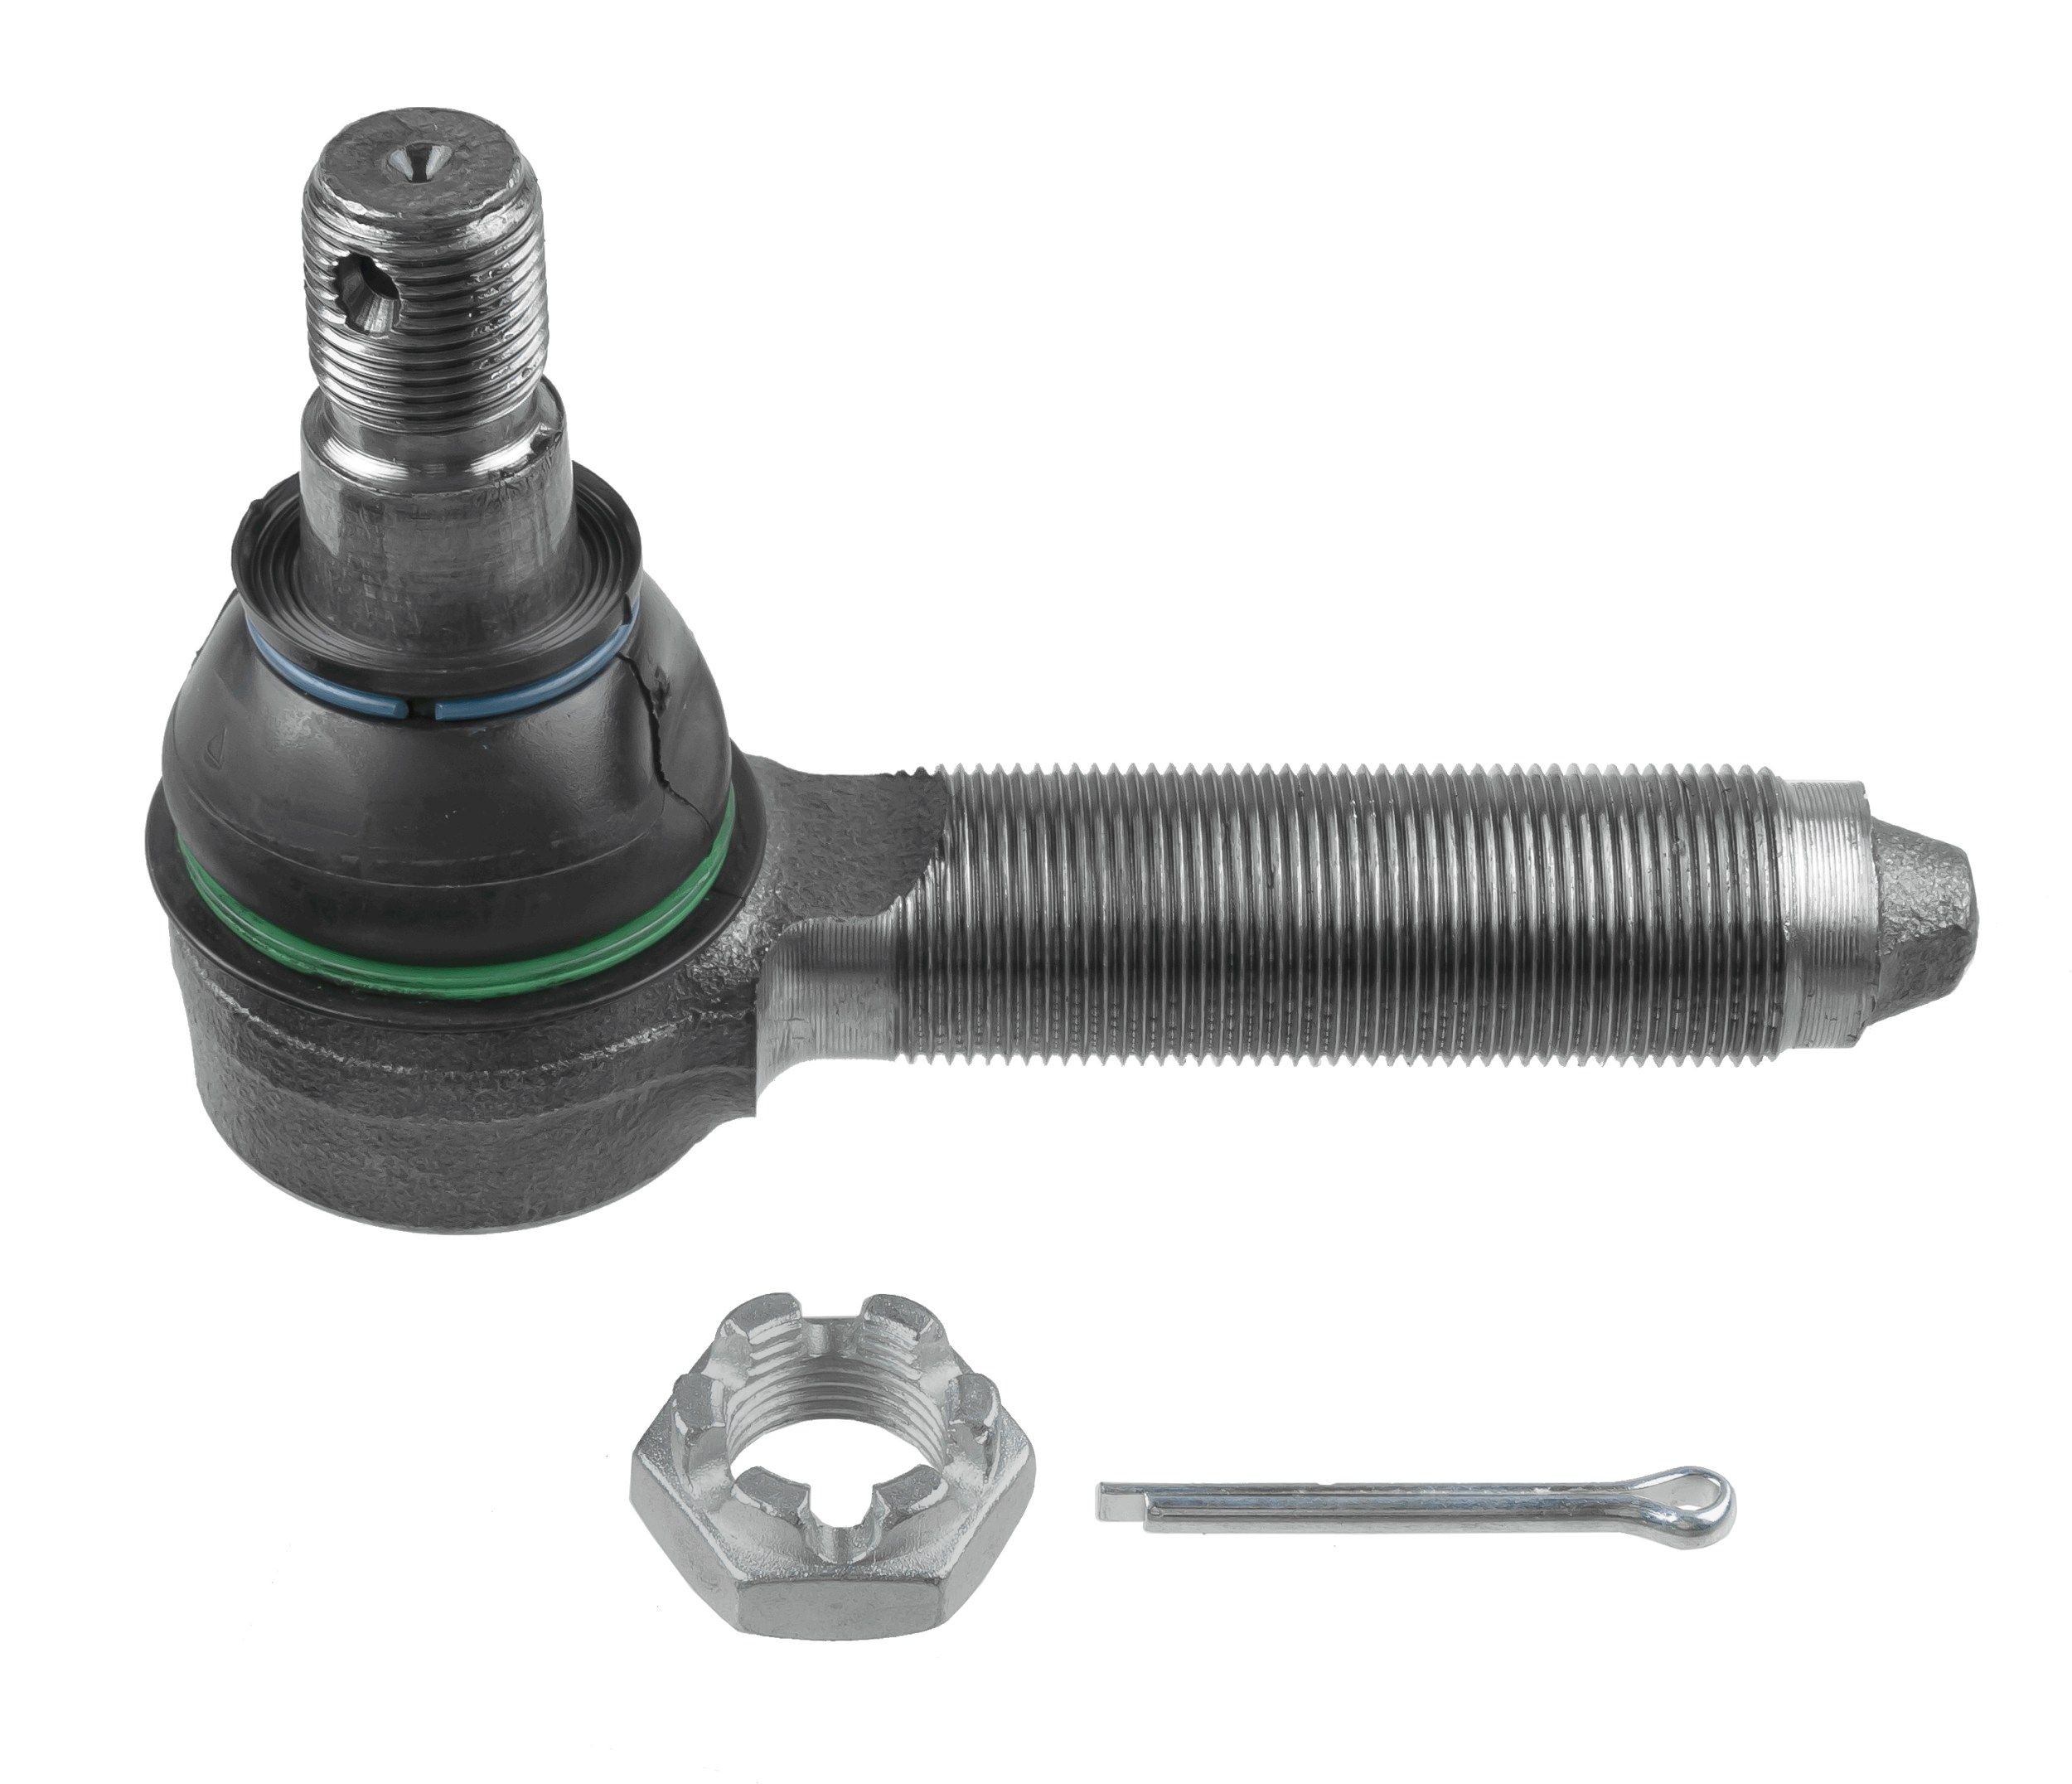 LEMFÖRDER 11380 01 Track rod end Cone Size 22 mm, M24x1,5 mm, with accessories